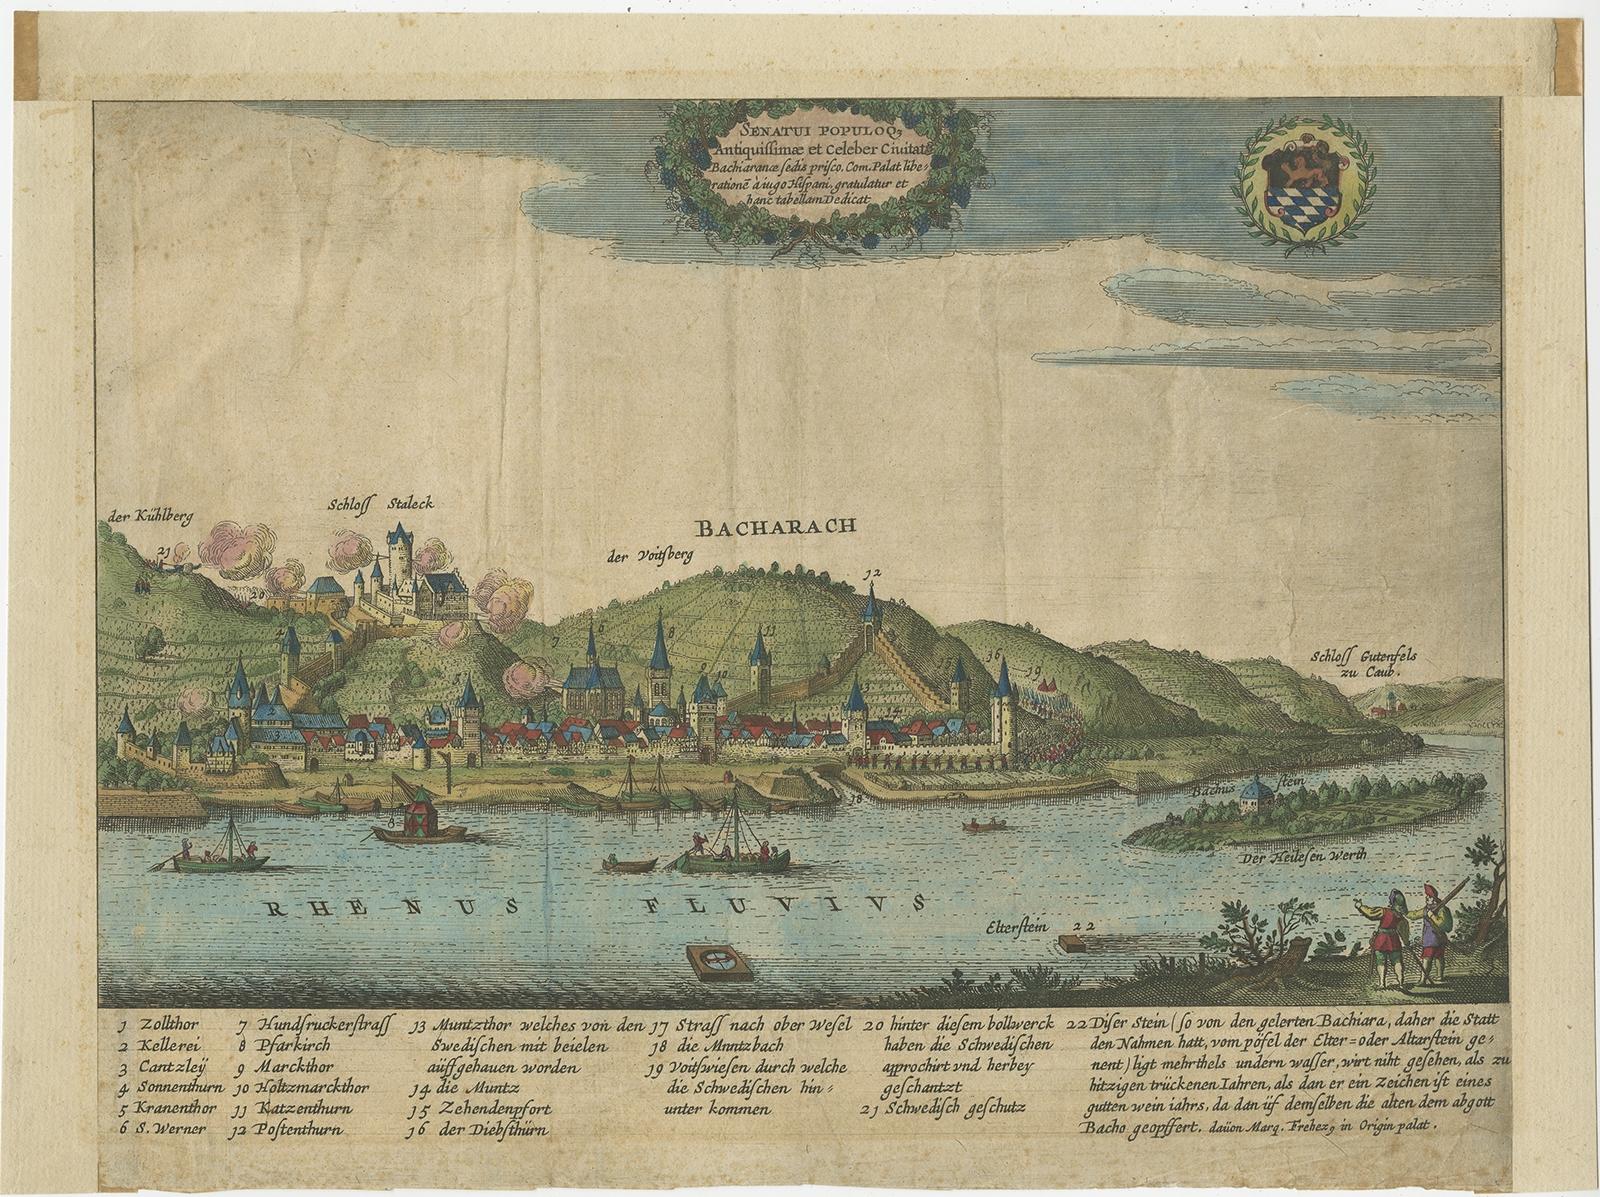 Antique print titled 'Senatui Populoq, Antiquissimae et Celeber Ciuitat, Bachiaranae sedis prisco (..)'. 

View of Bacharach, a town in the Mainz-Bingen district in Rhineland-Palatinate, Germany.

Artists and Engravers: Anonymous. Made after